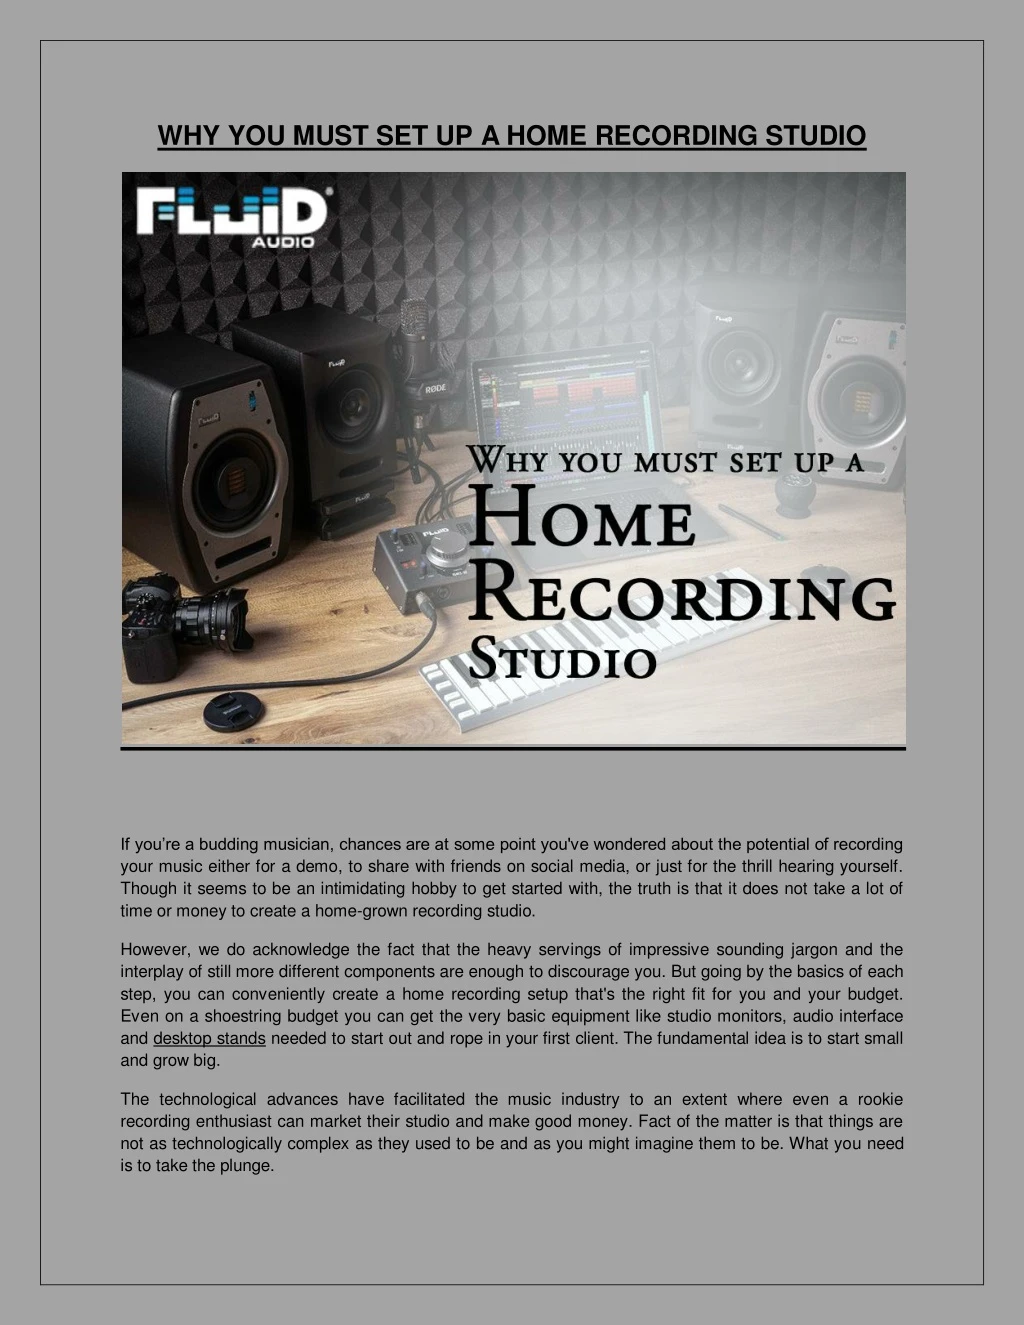 why you must set up a home recording studio